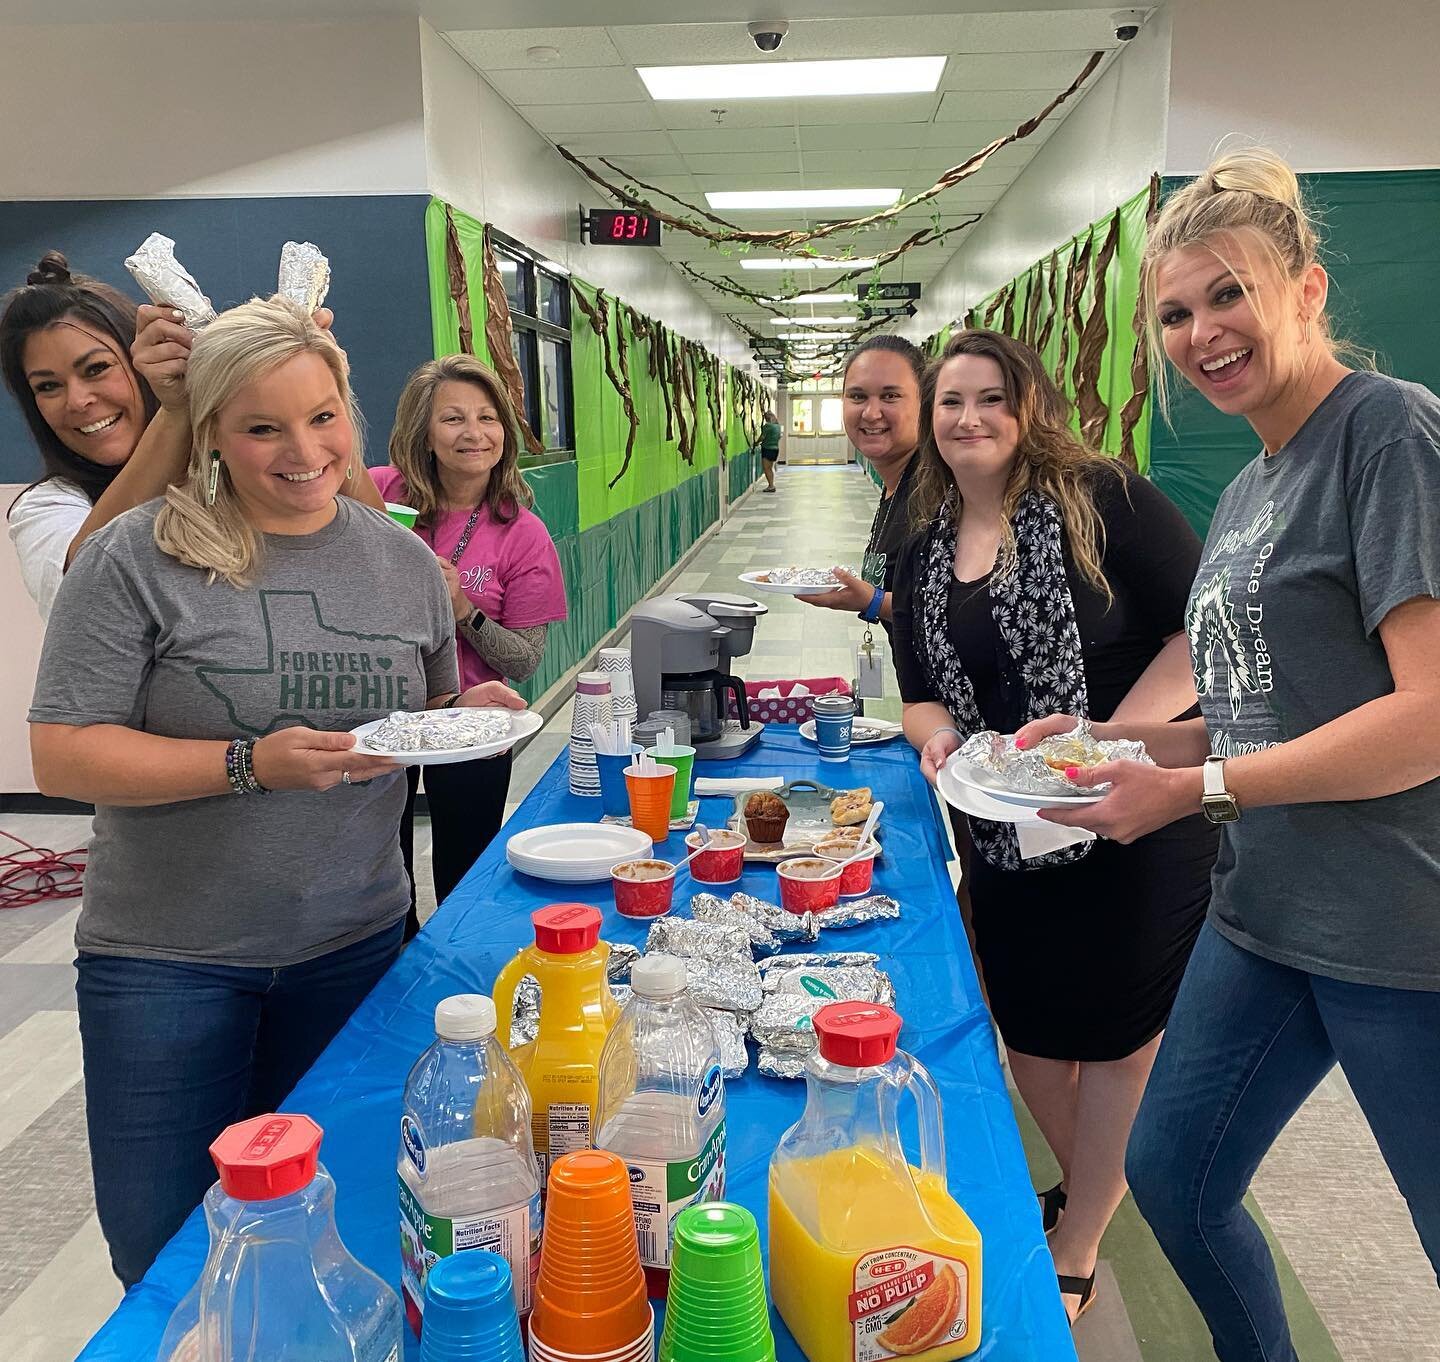 Happy FriYAY! We are suckers for school staff members! We were happy to provide Marvin Biomedical Academy breakfast this morning. Pour into your teachers, you won&rsquo;t be sorry! @waxahachieisd